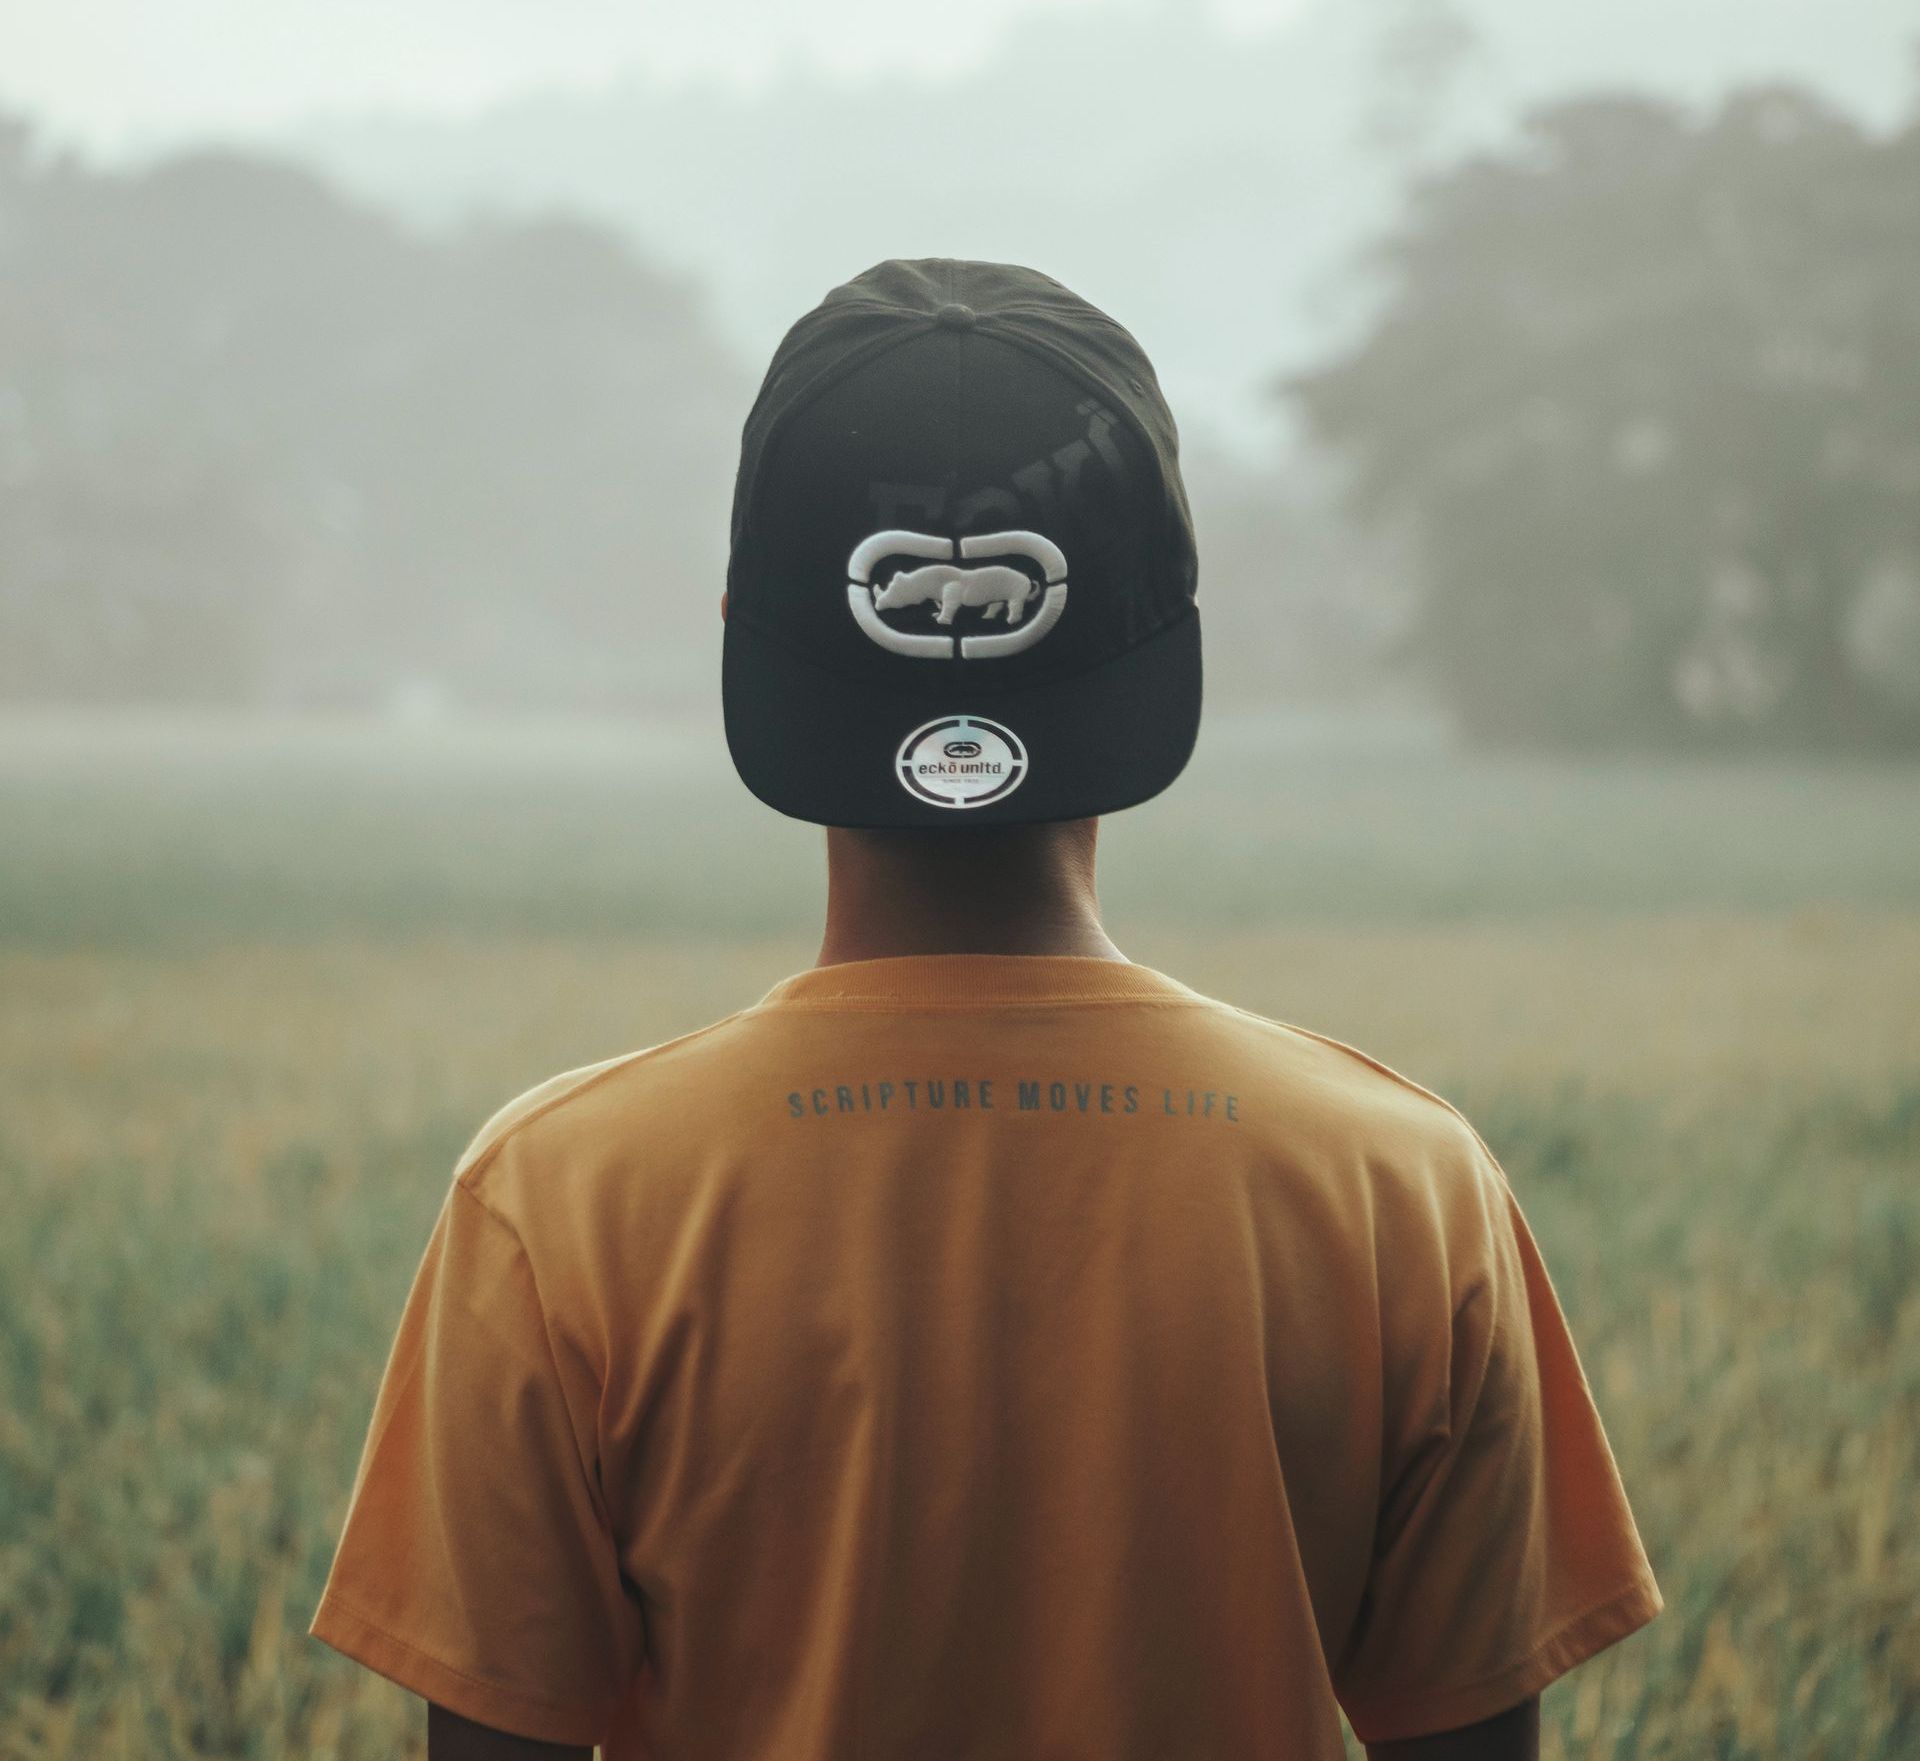 Image of a person from behind wearing hat backwards looking out onto a foggy field